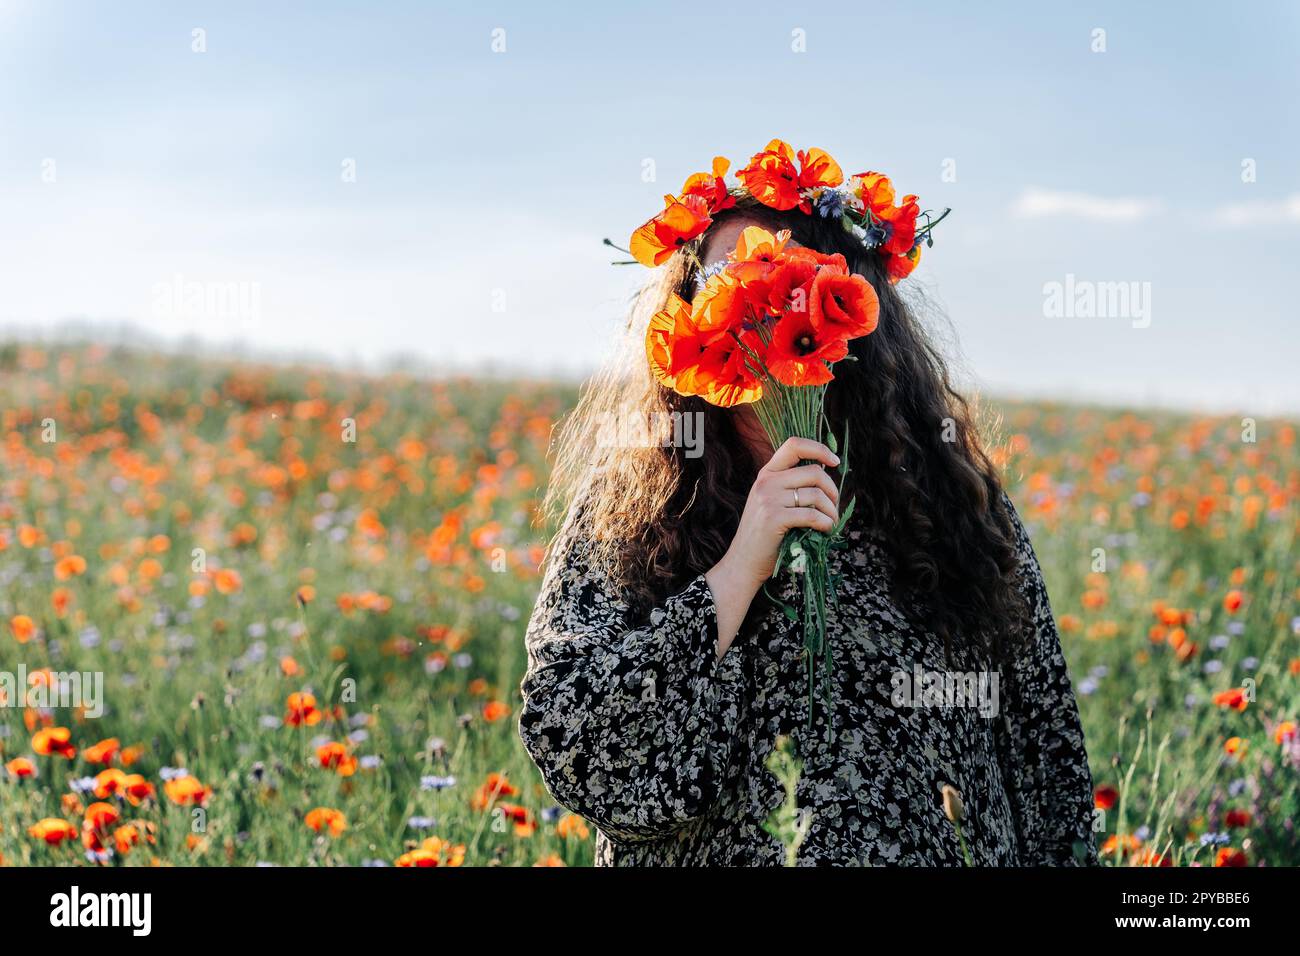 Long-haired curly woman plus size in a wreath of red poppies stands among a field of meadow flowers and covers her face with a bouquet of poppies Stock Photo